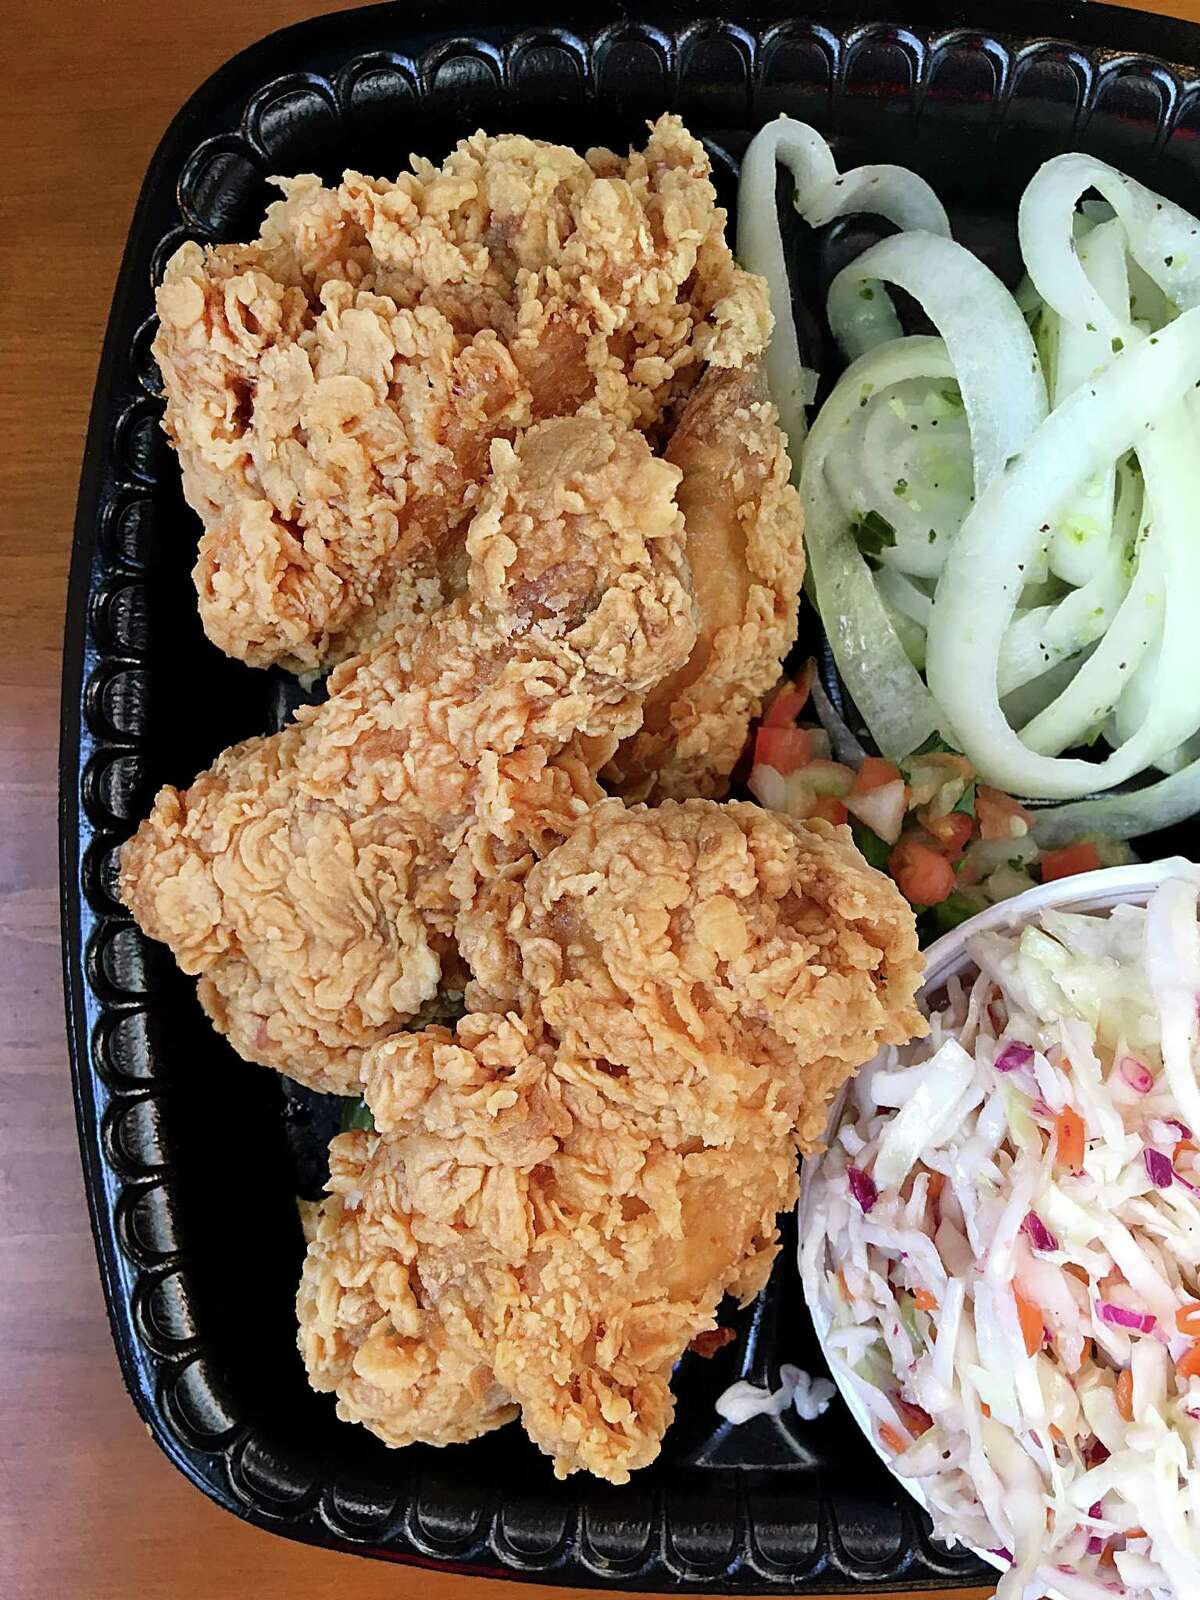 Fried chicken, cole slaw and pickled onions from Bill Miller Bar-B-Q.